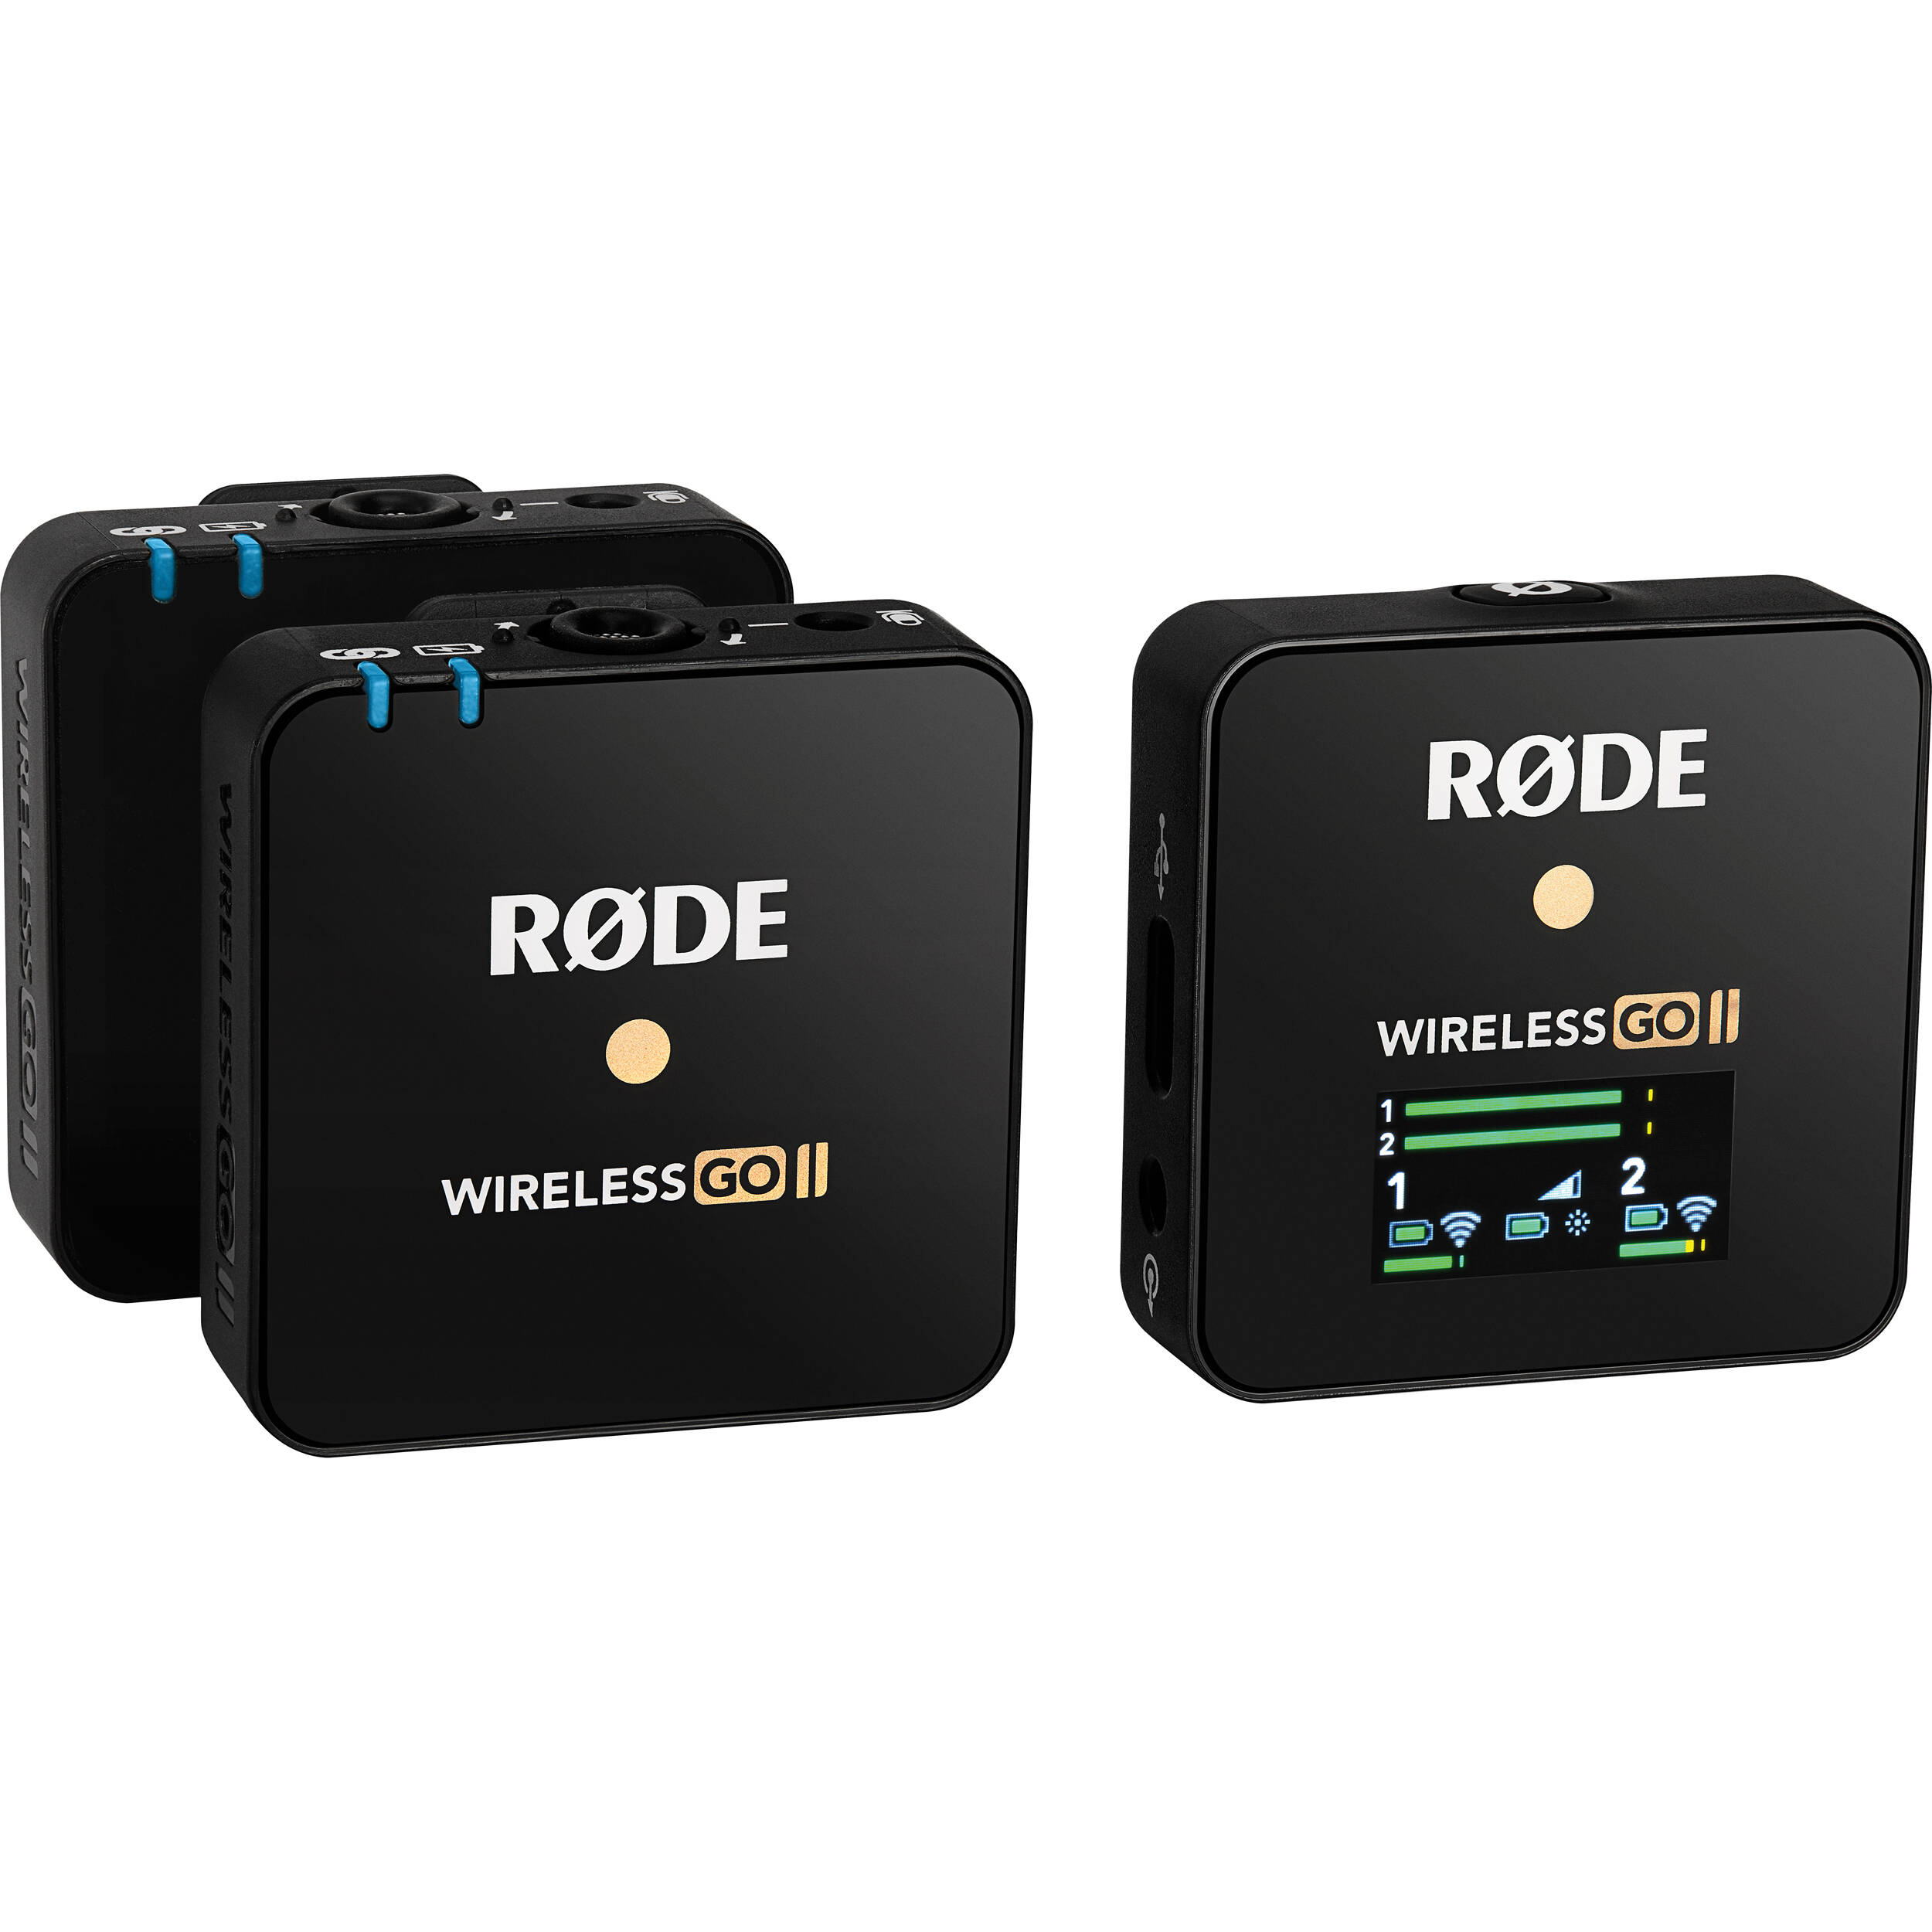 Rode Wireless GO II 2-Person Compact Digital Wireless Microphone System/Recorder (2.4 GHz, Black)-Damaged Box